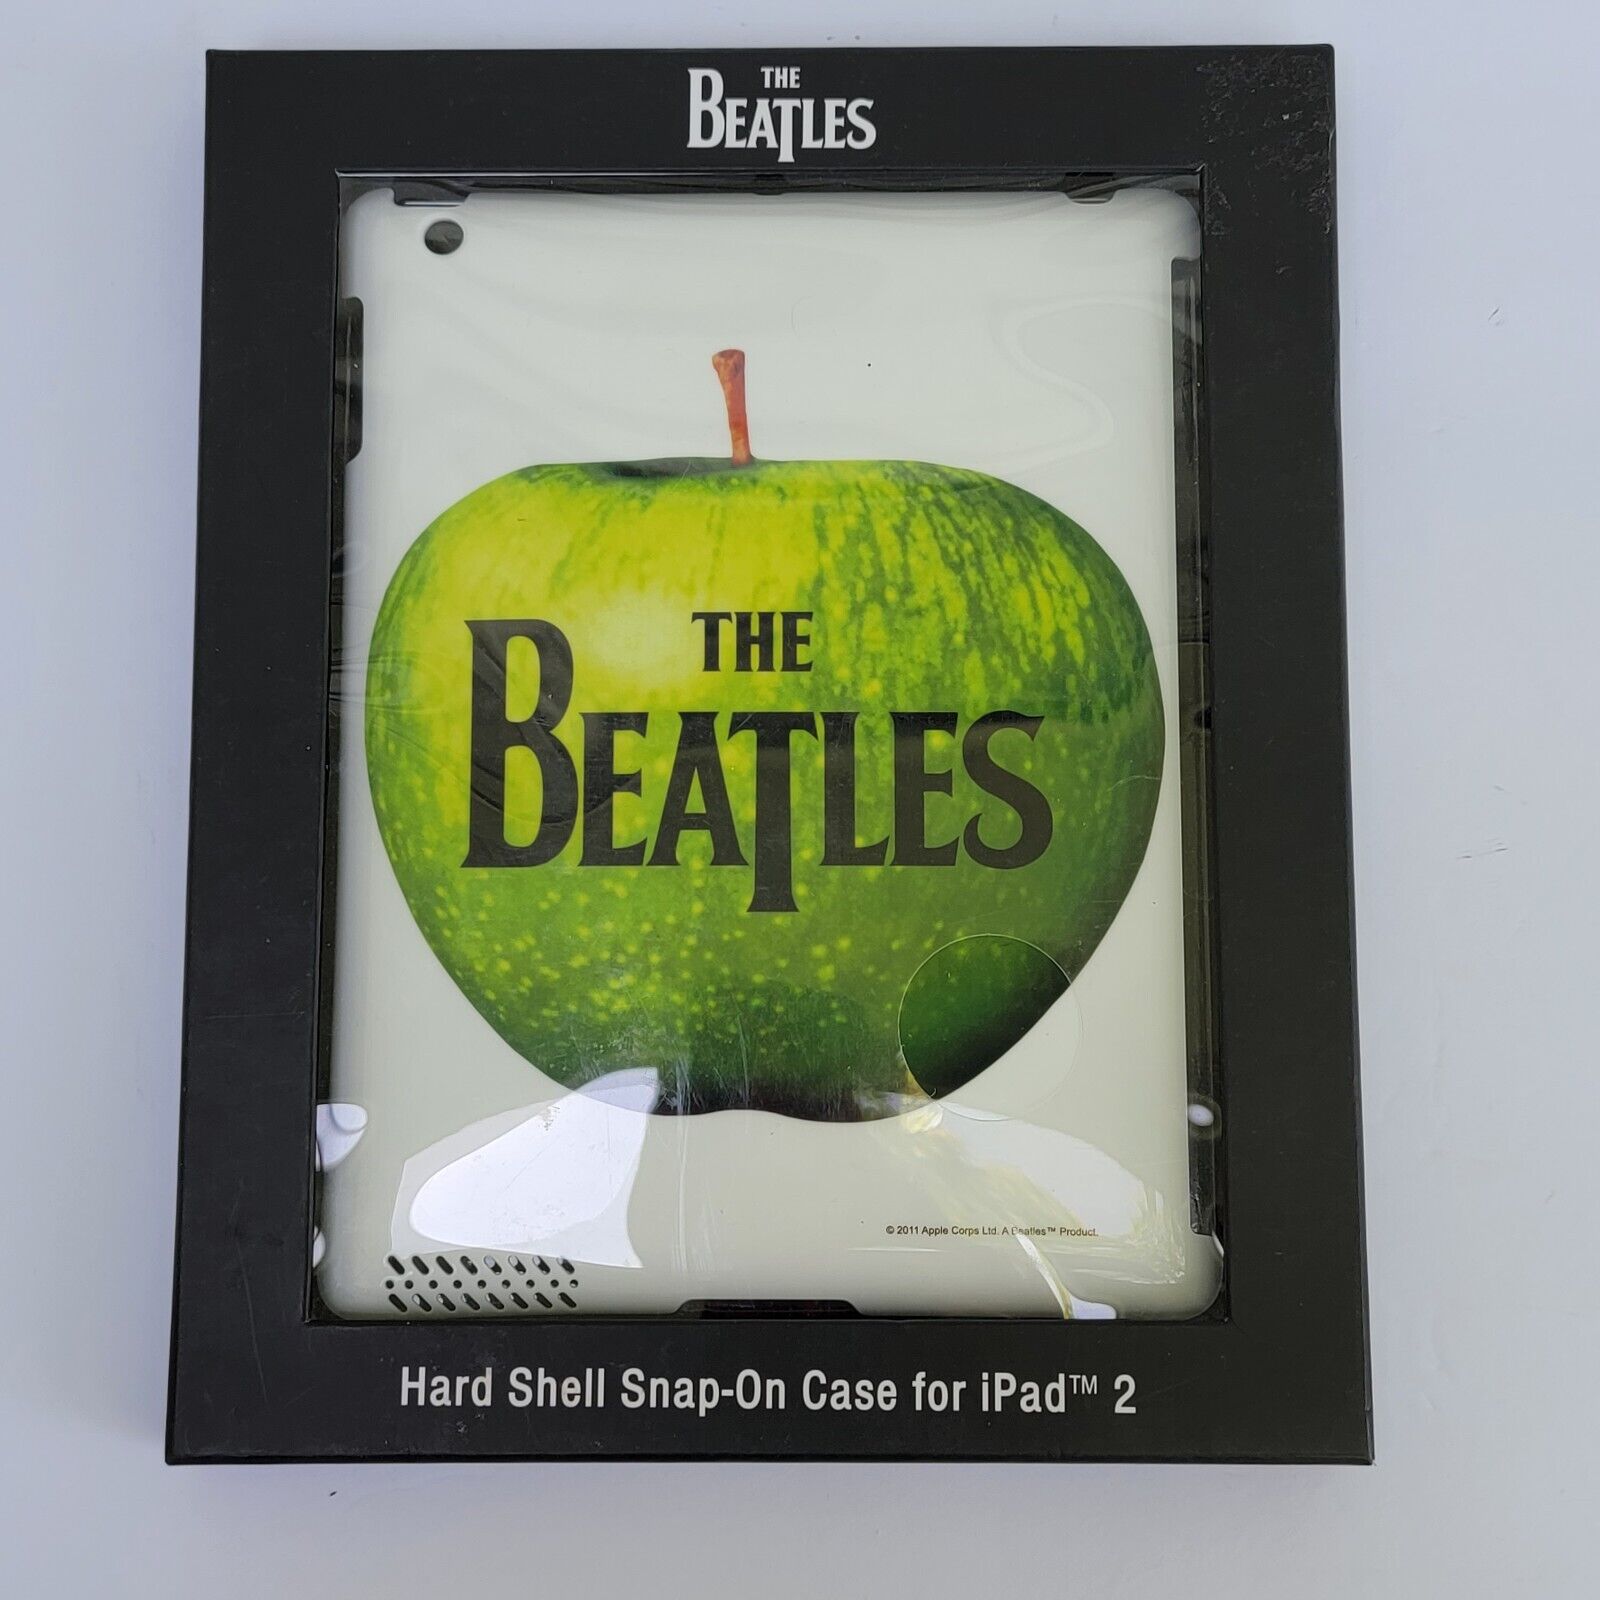 The Beatles Apple Cover Hard Shell Snap-On Case For iPAD 2 NEW 2011 Collectible 